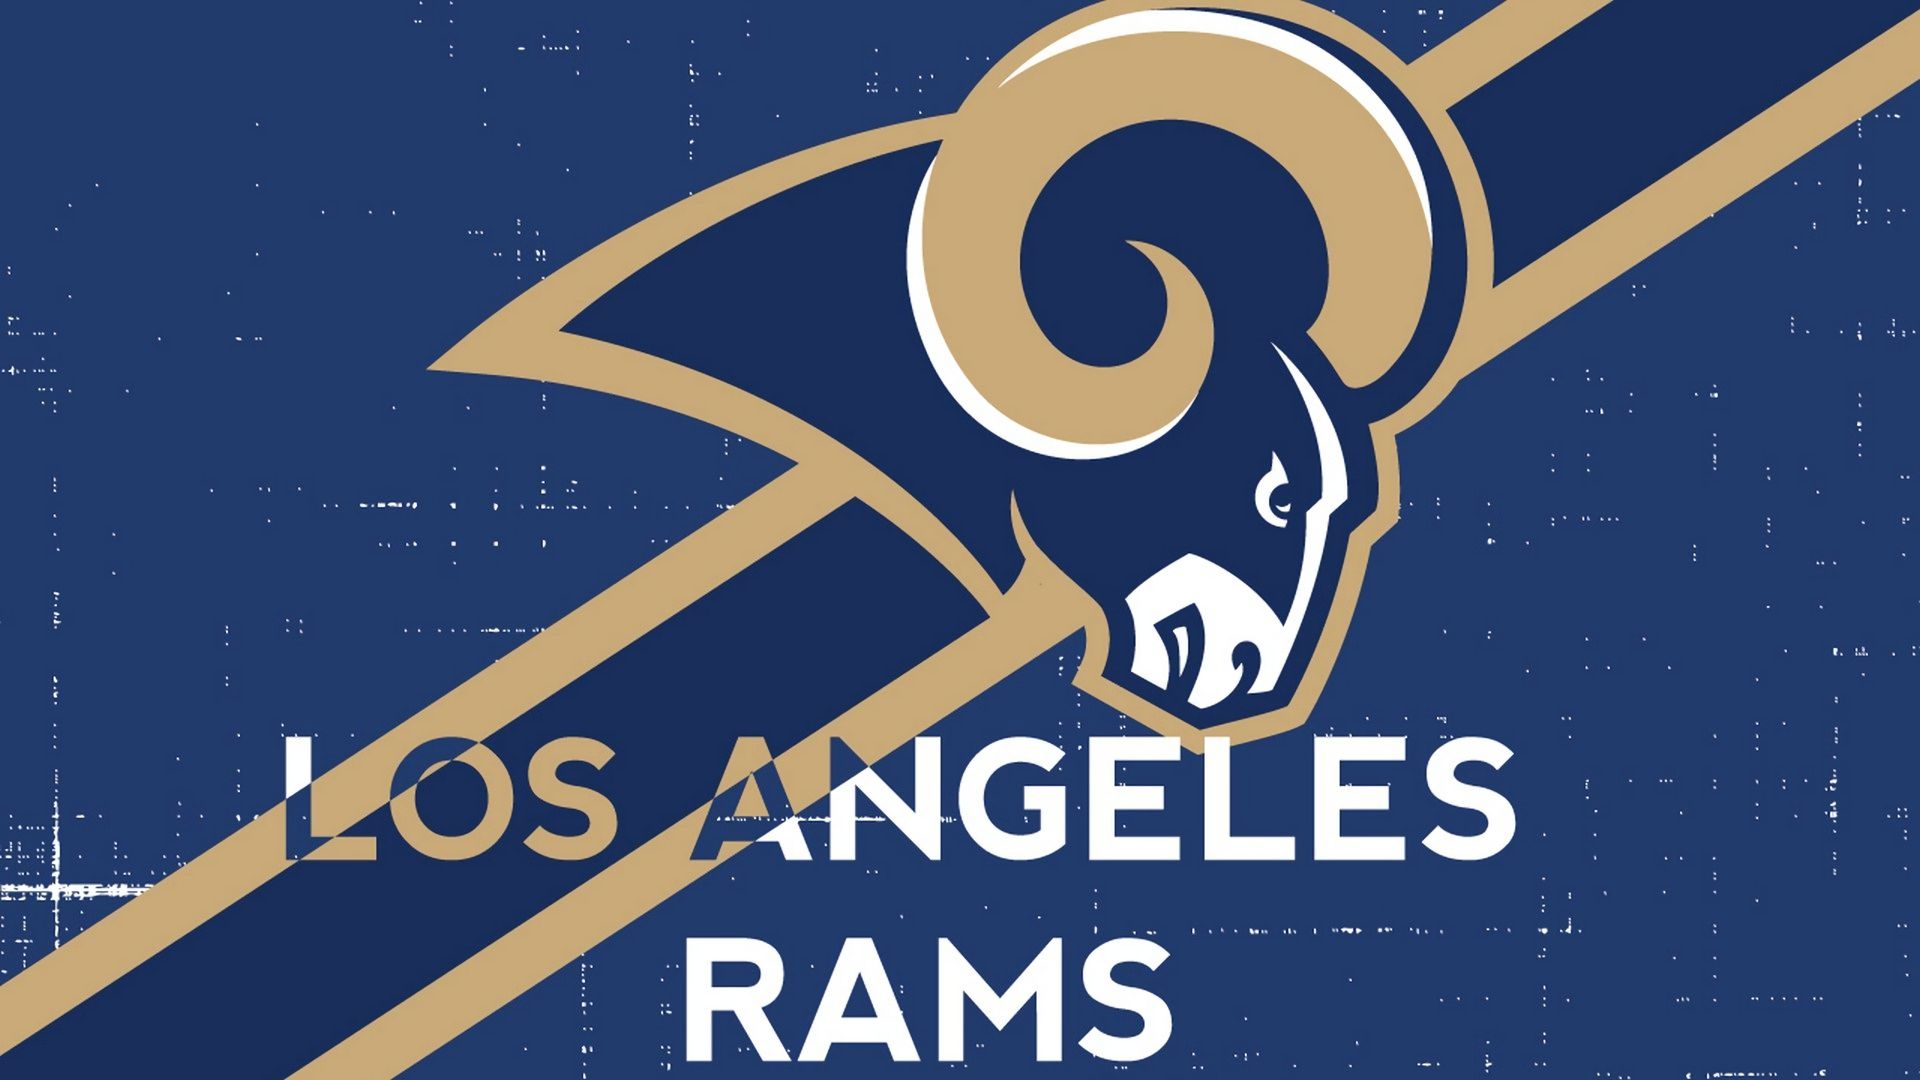 New logo New wallpapers   Los Angeles Rams  Facebook